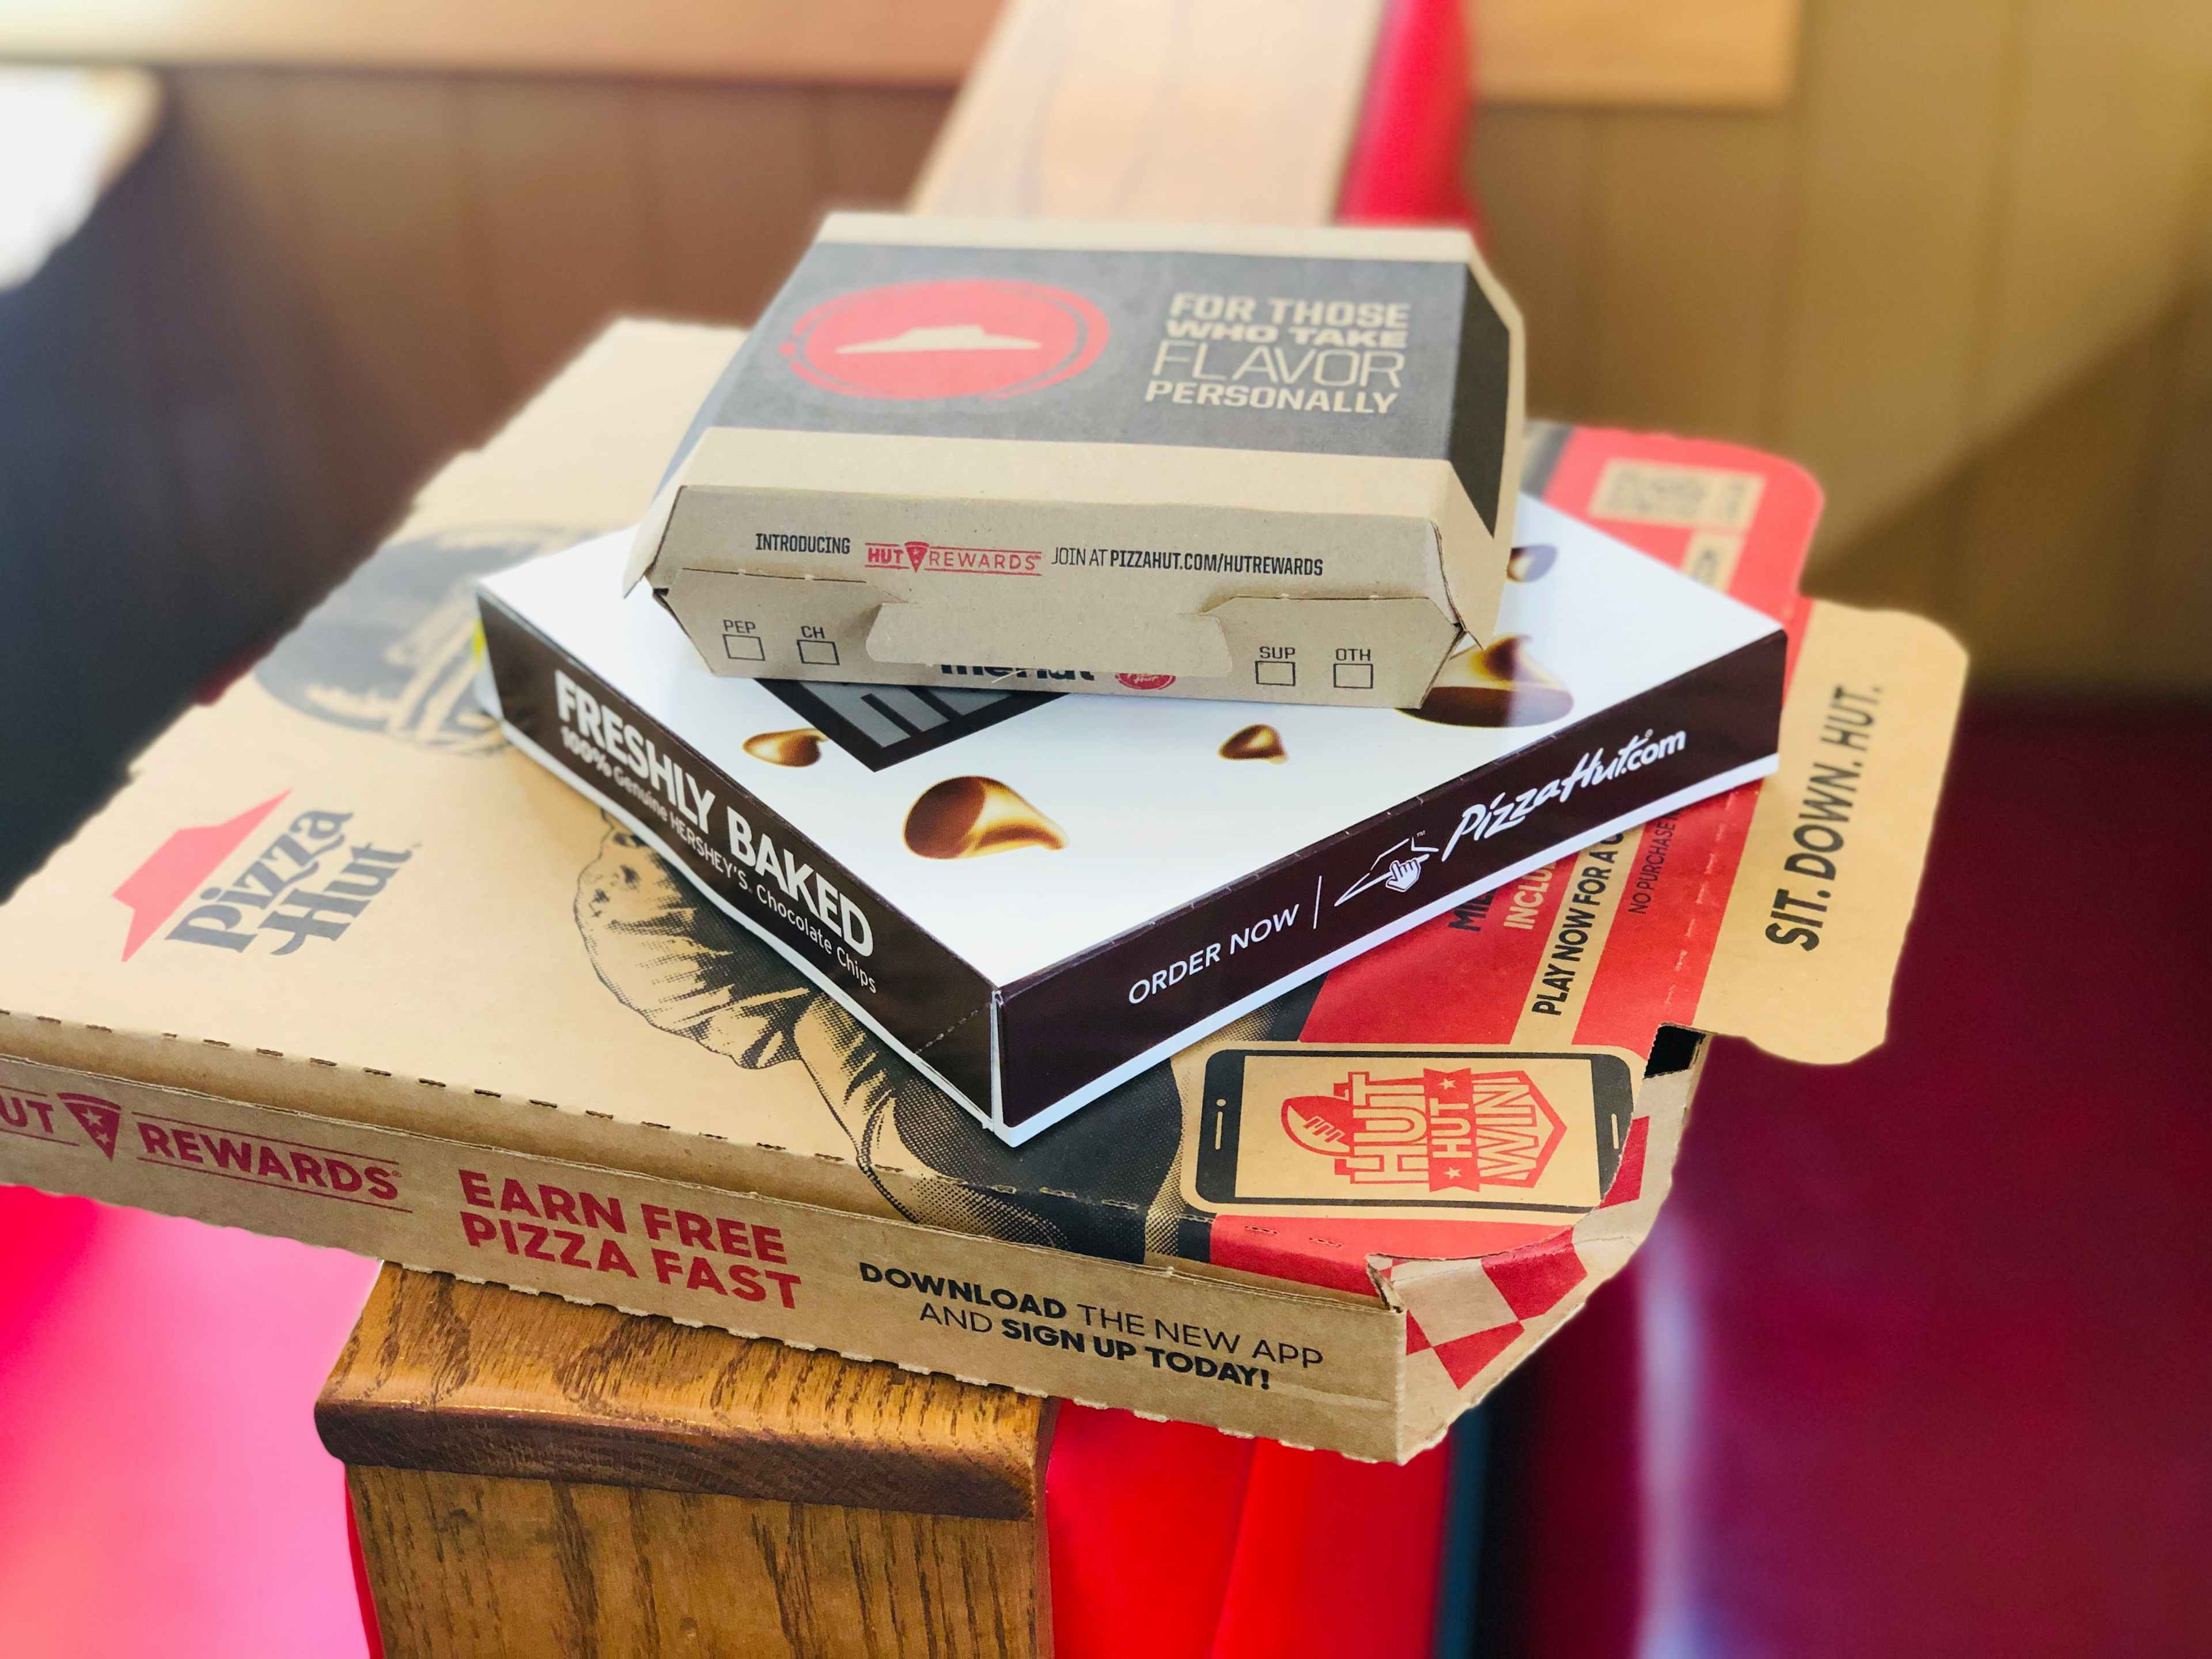 A pizza box, wing box, and dessert box from Pizza Hut stacked on top of each other